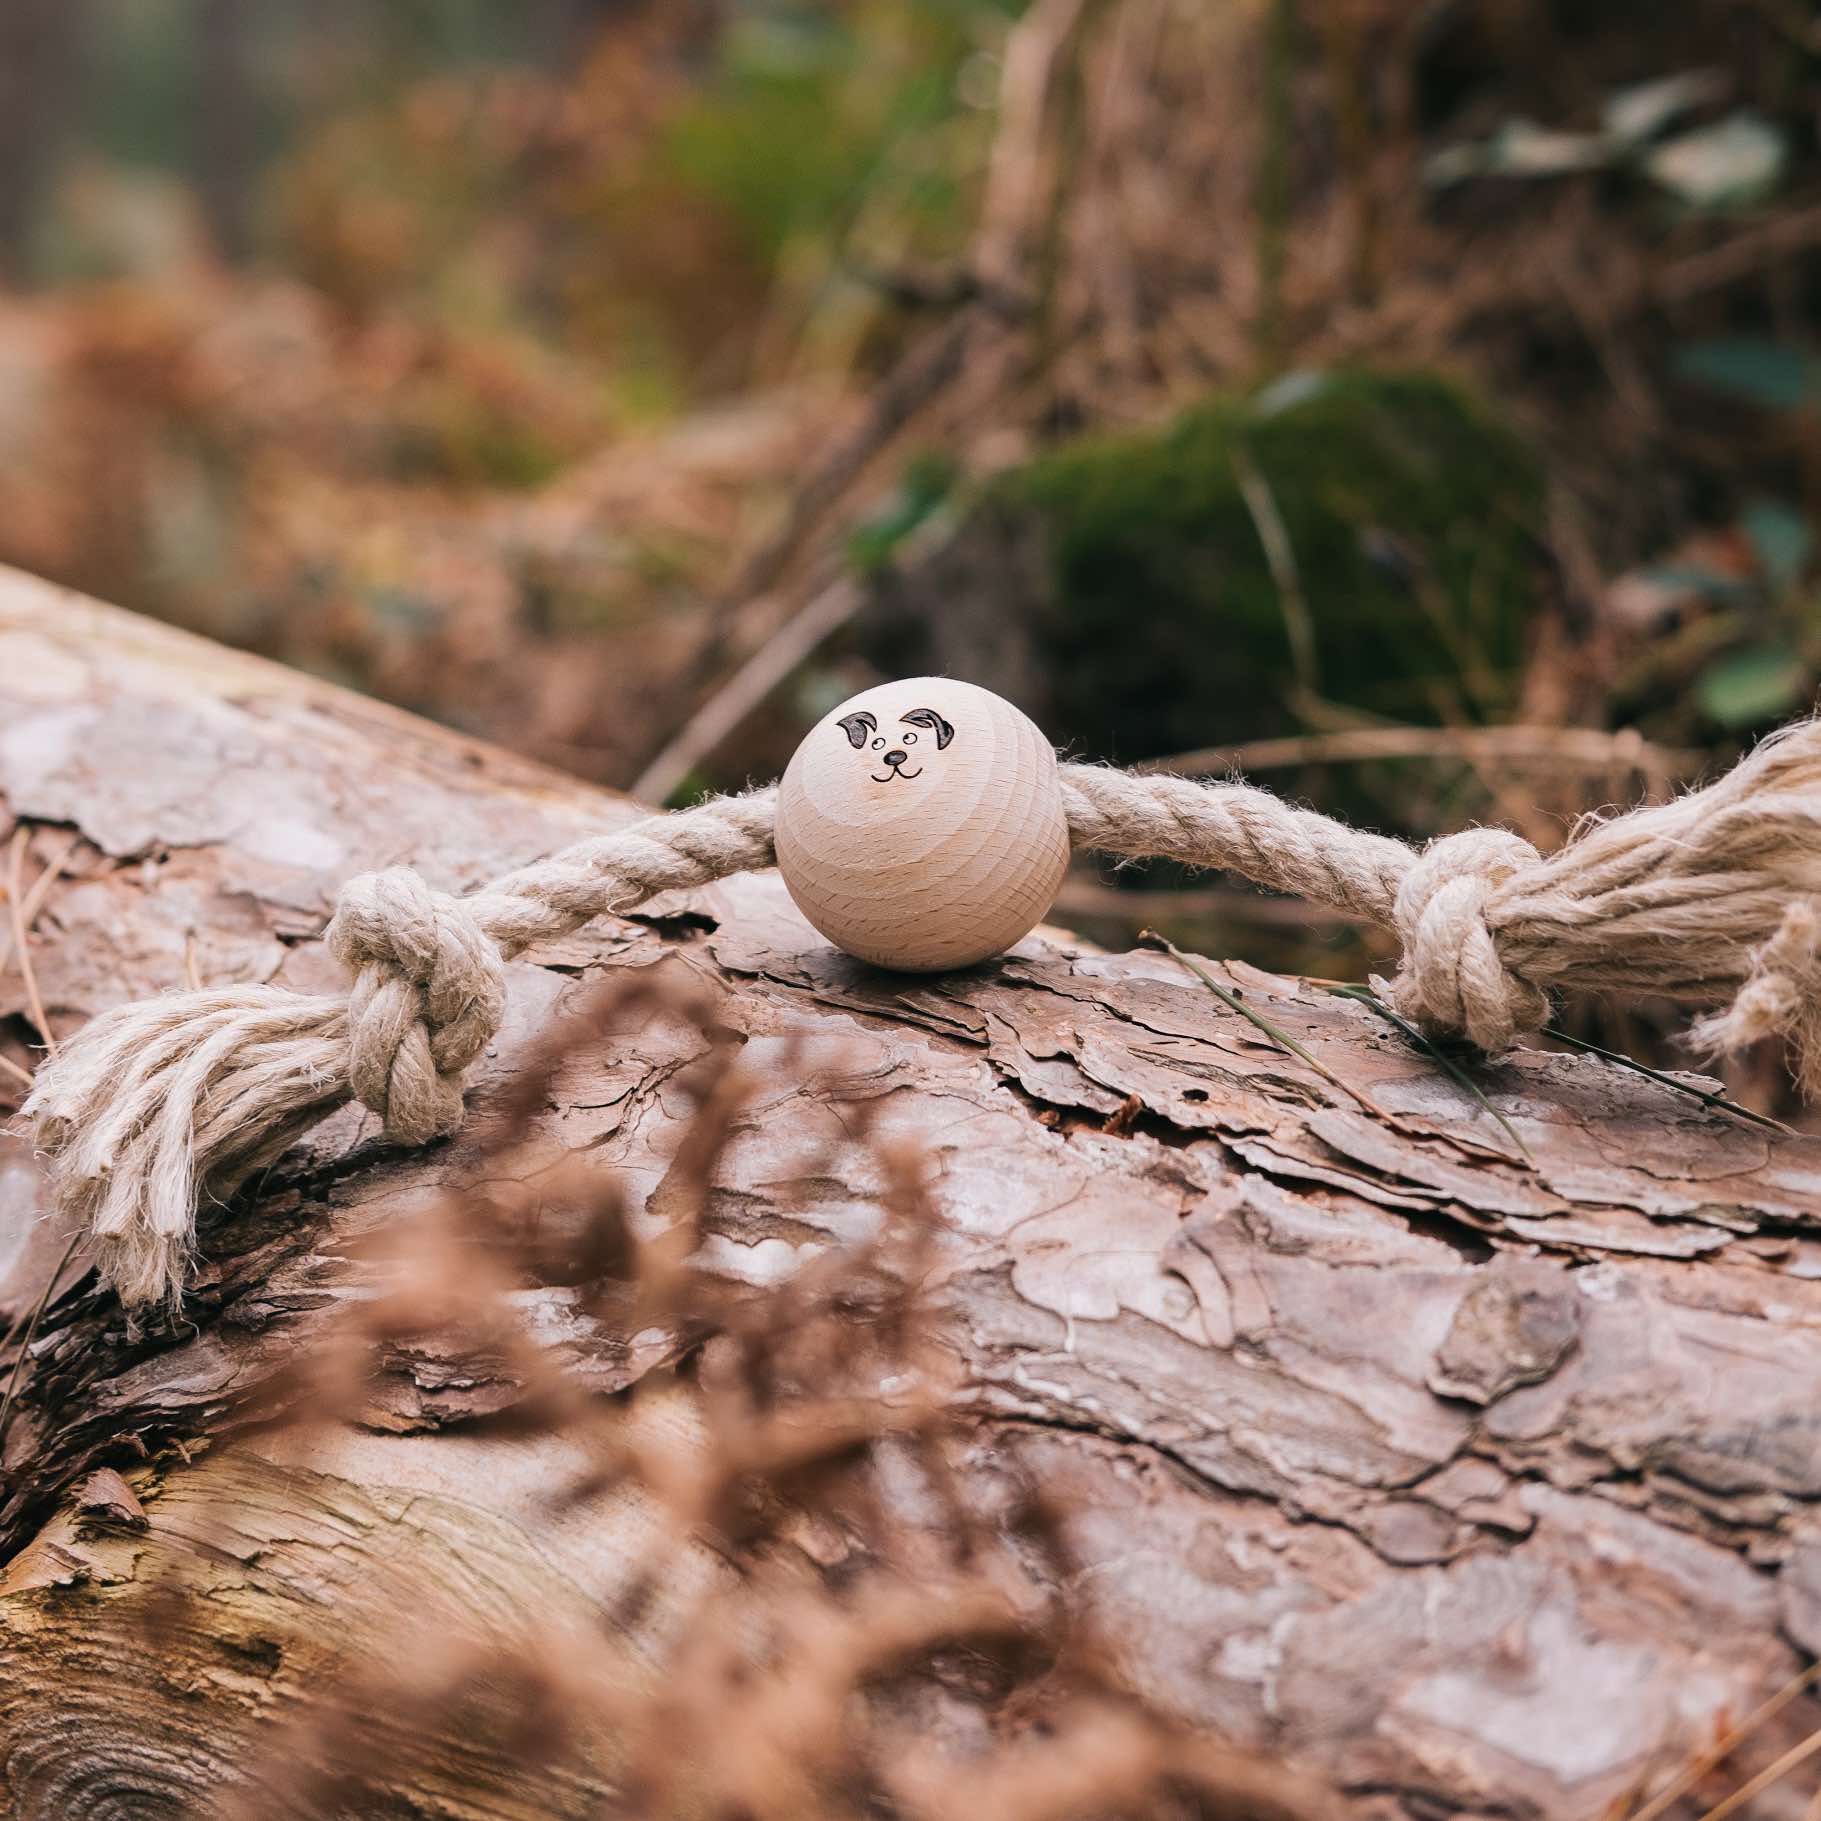 Smug Mutts Tug-a-Ball Natural Hemp and Beech Wood Eco Friendly Dog Toy Resting on a Log, All Handmade in the UK and 100% Plastic Free